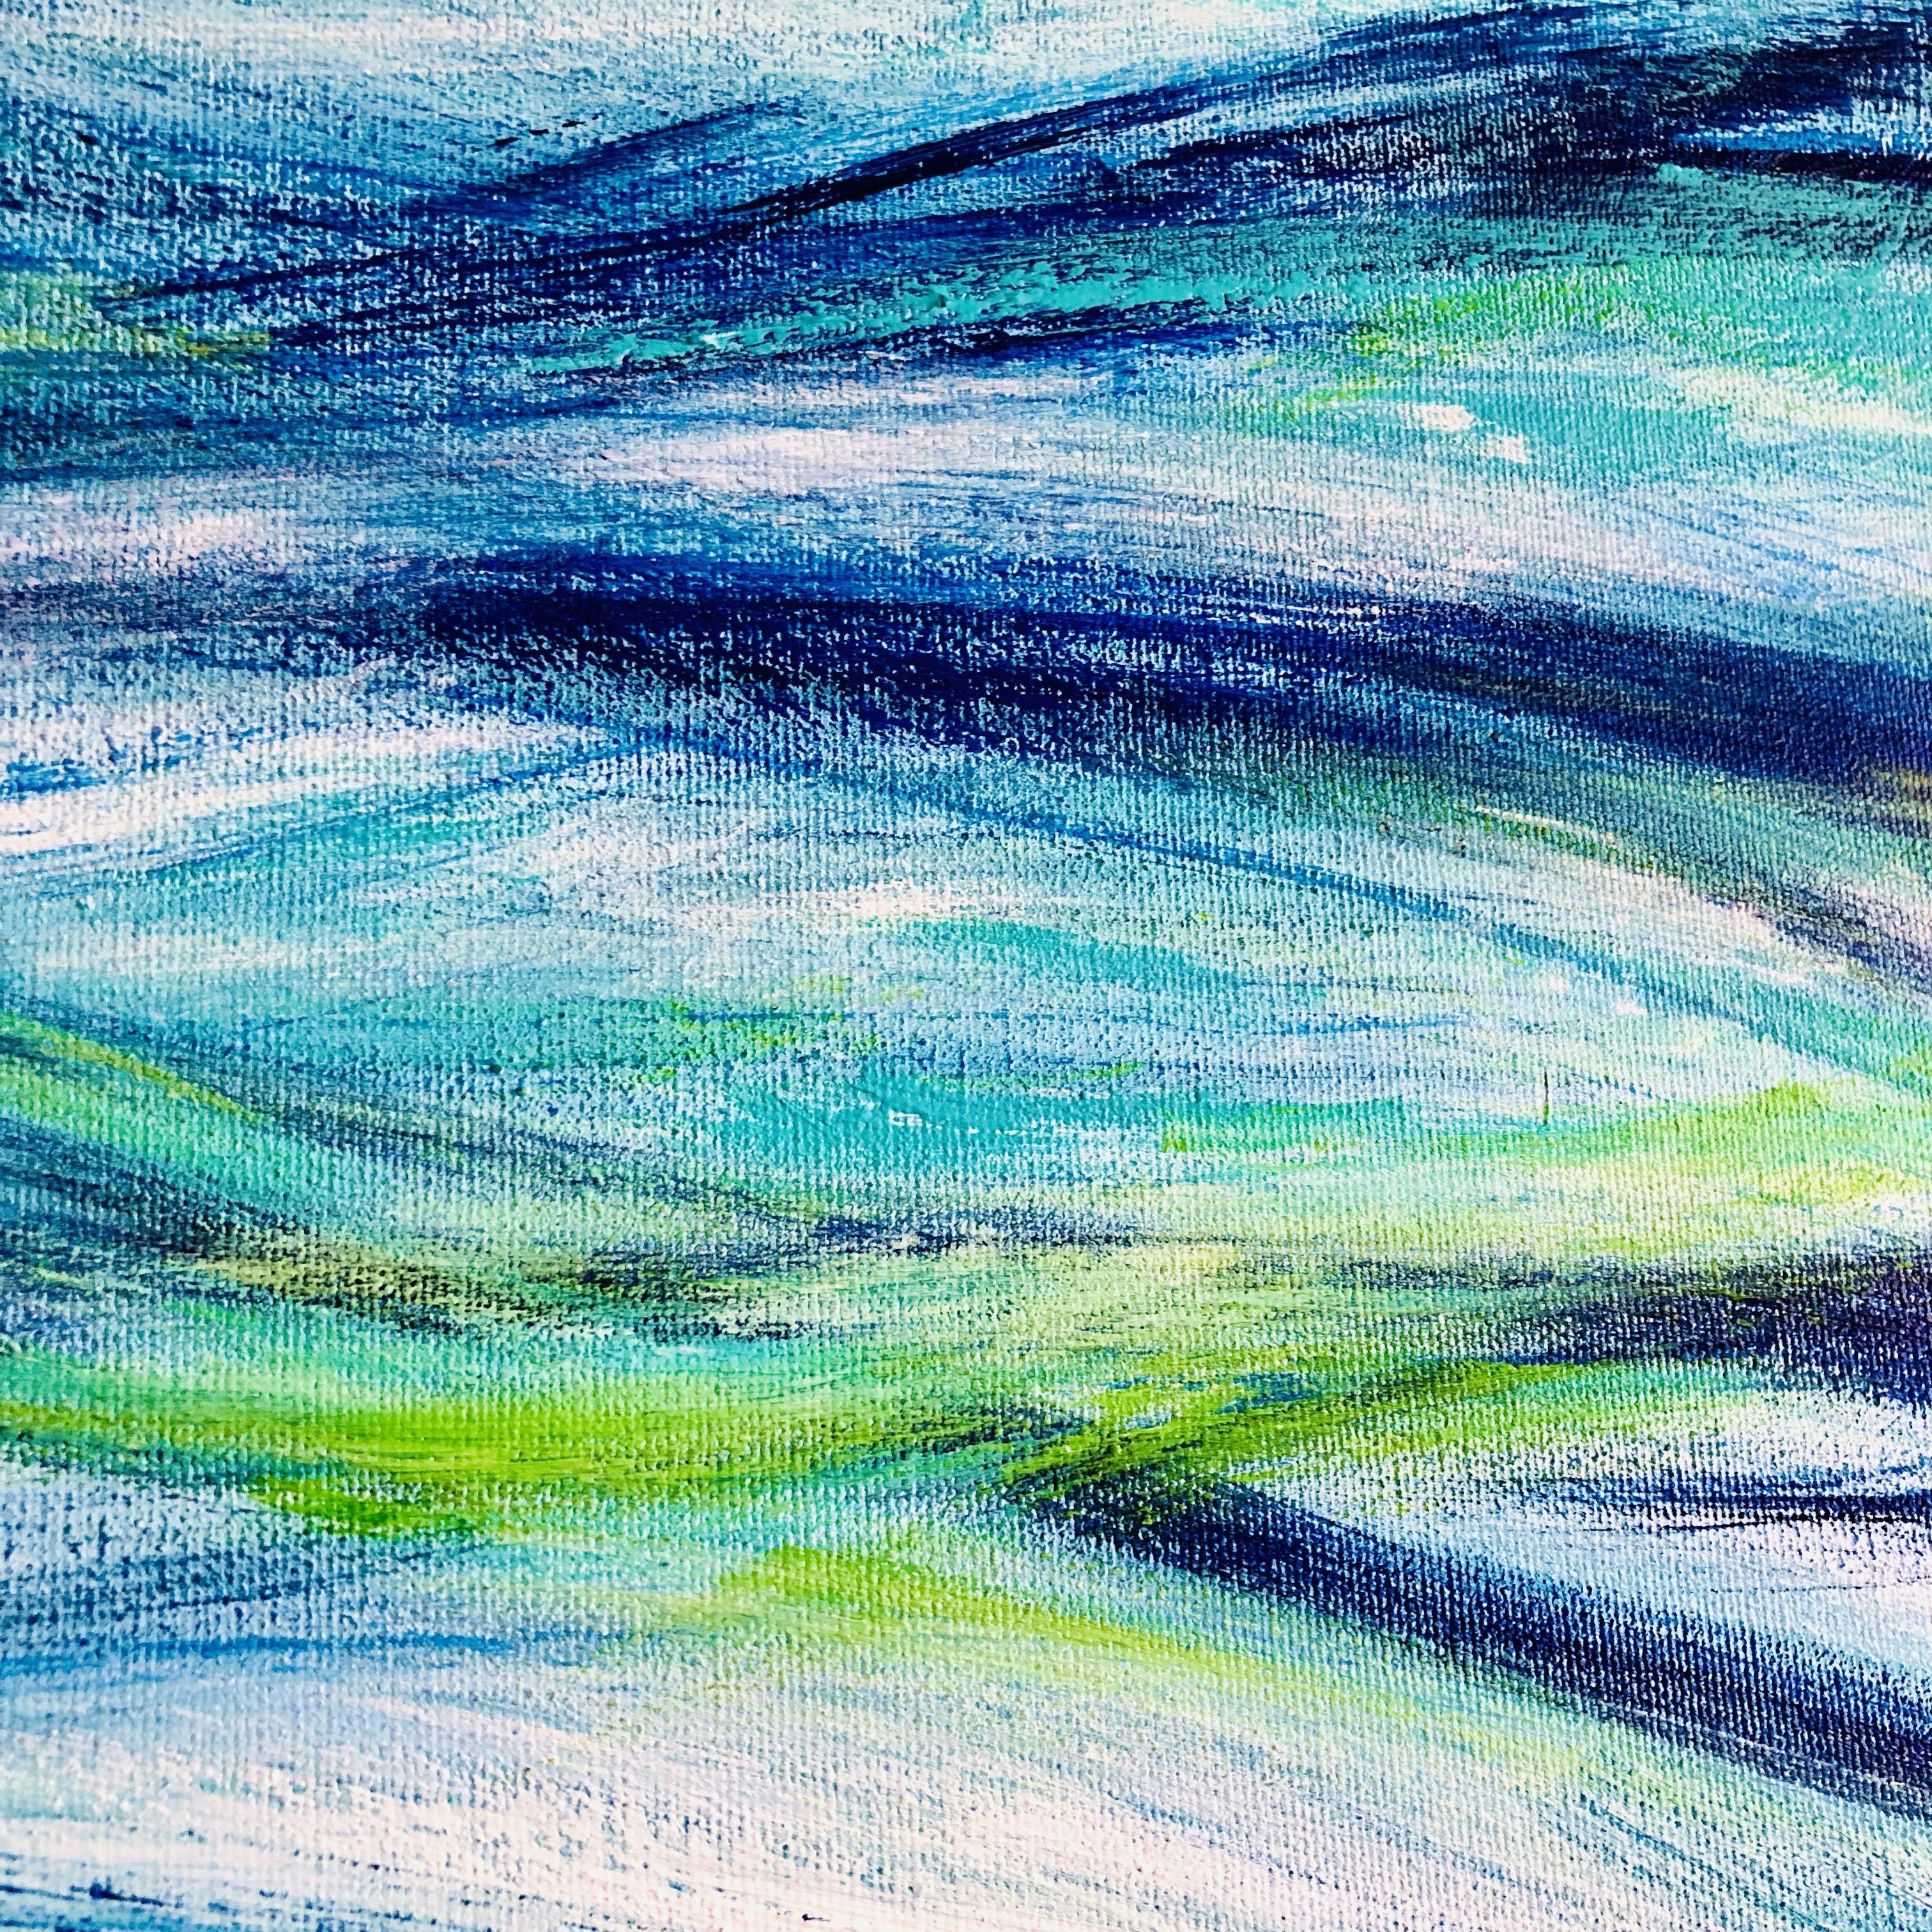 Flux, flow...  The sea... the ebb and flow, the wind which rises and makes it ripple, the sky and the sun which give it a thousand and one shades of blue, turquoise and green... with a touch of foam lace ...    This abstract work representing water